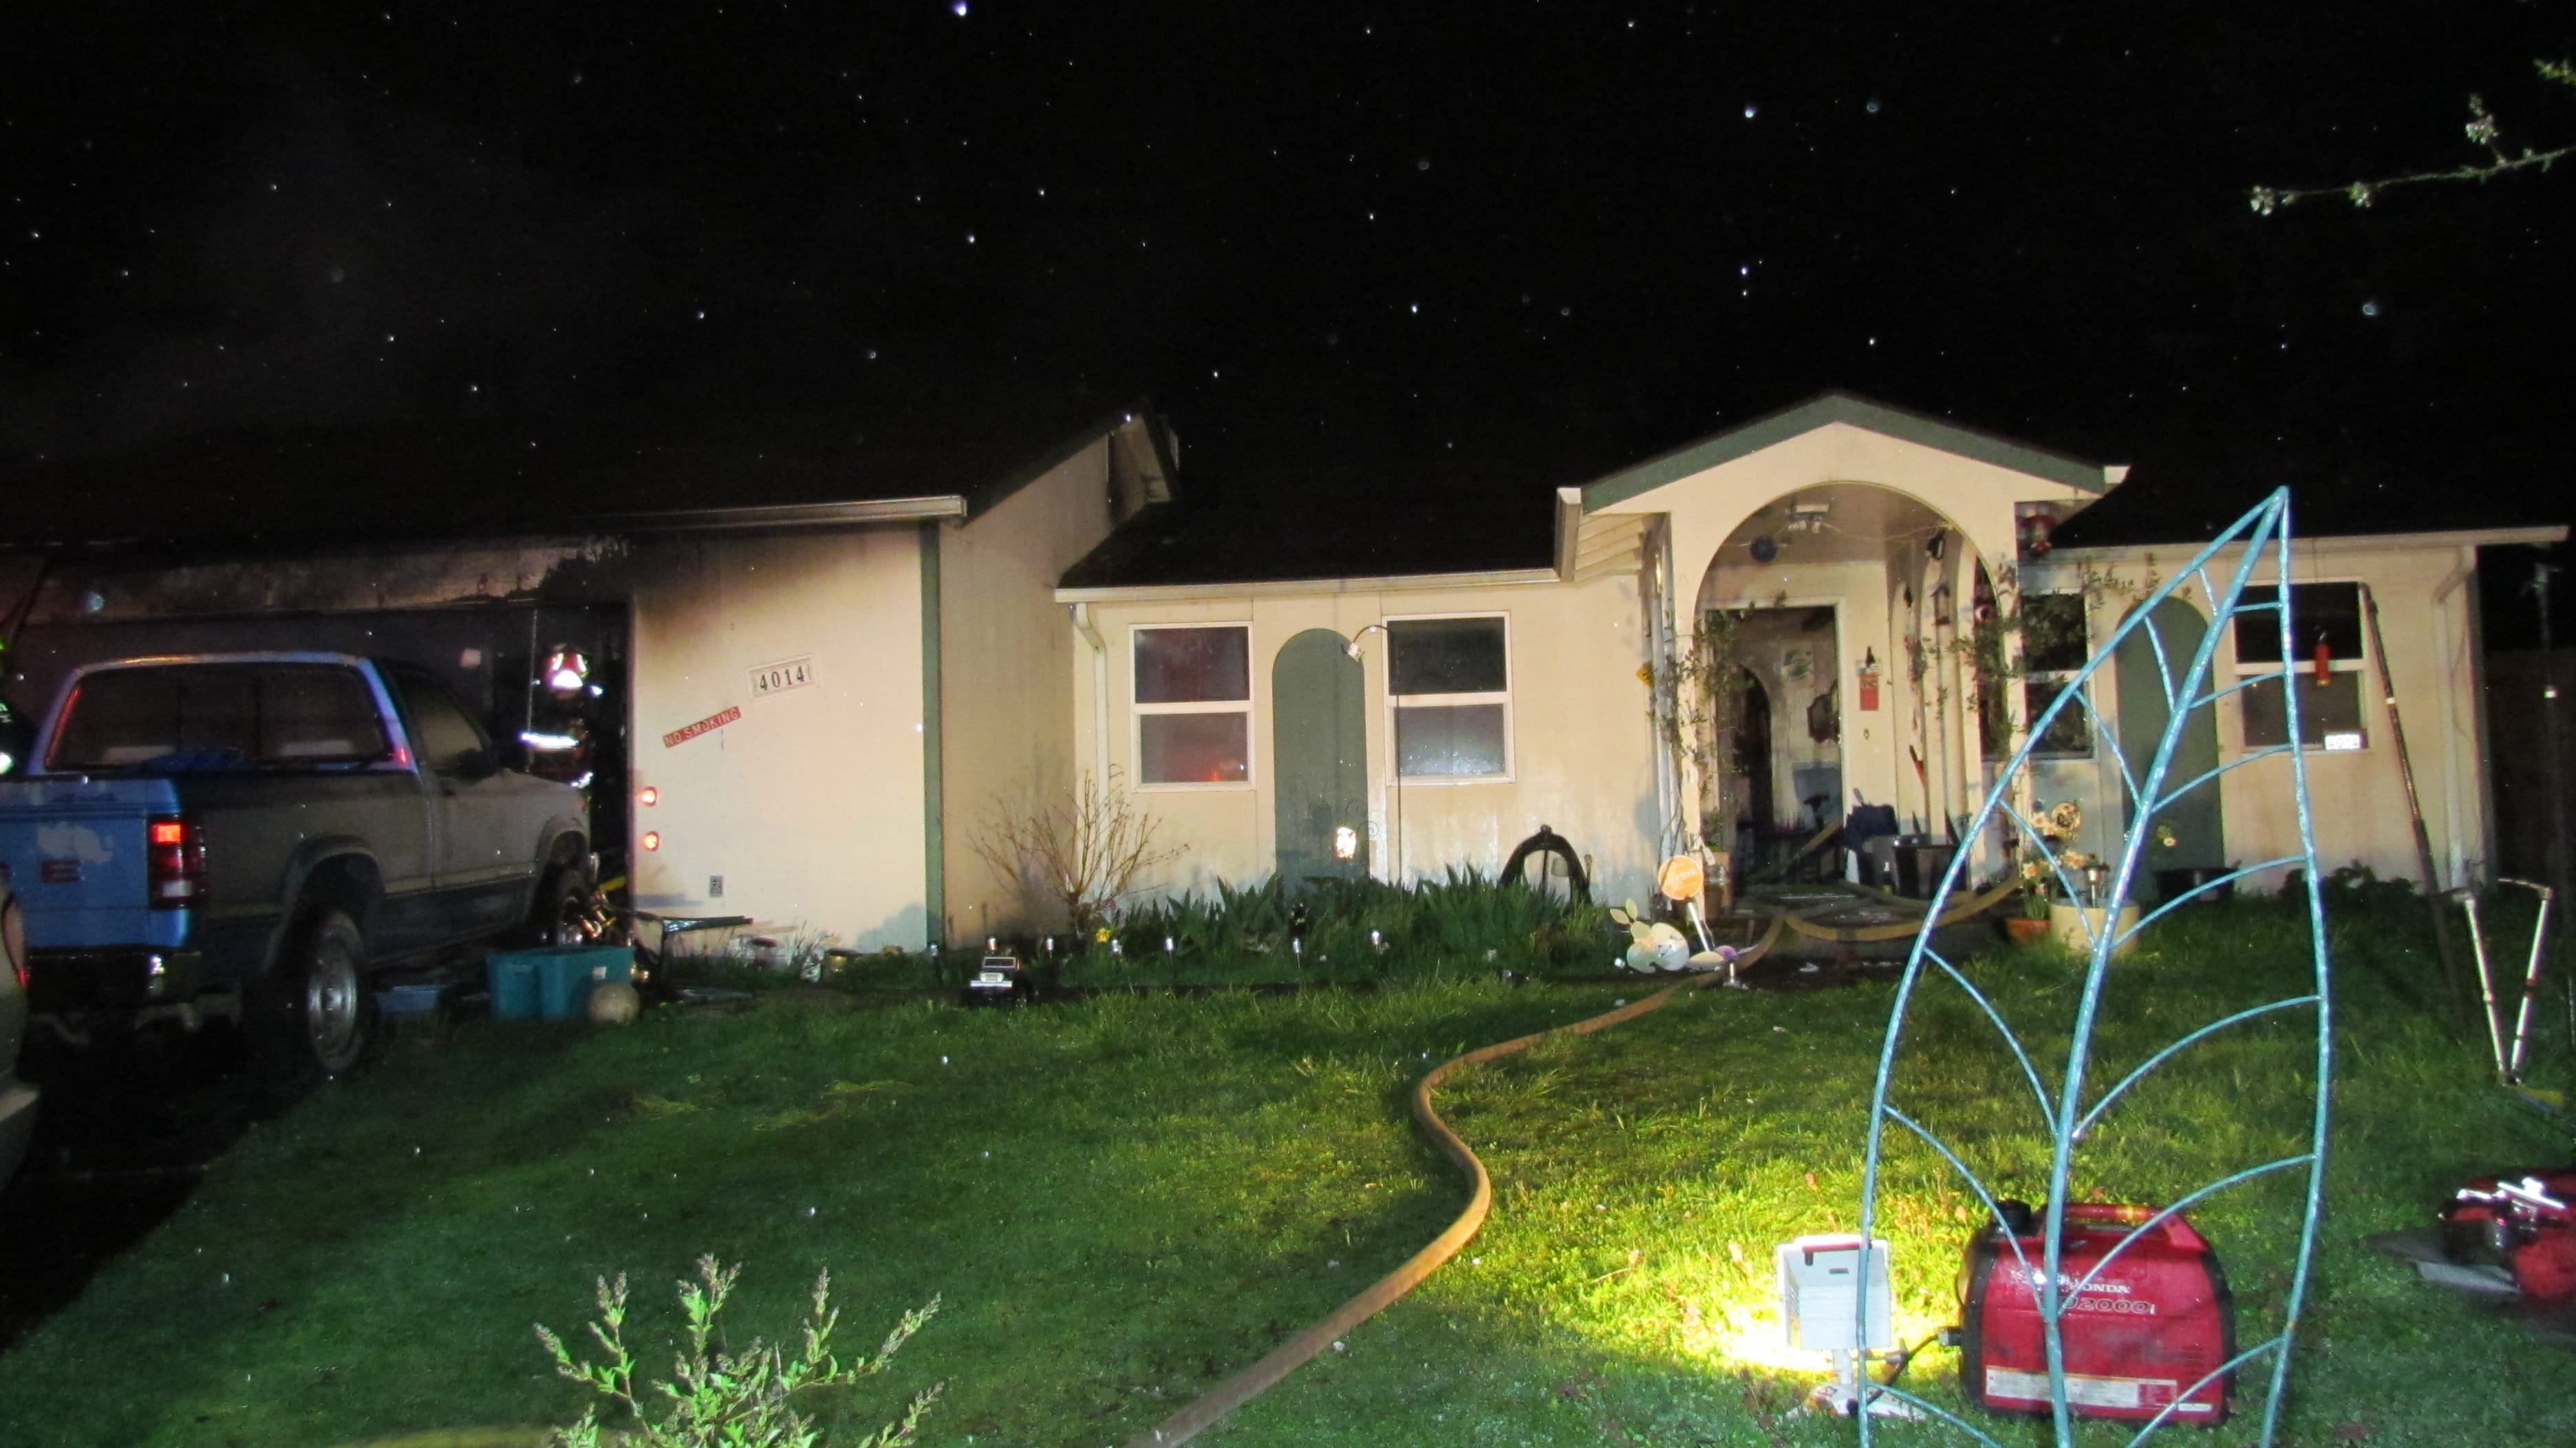 A garage fire Saturday night displaced three residents of an east Vancouver home near the 4000 block of Northeast 141st Avenue.